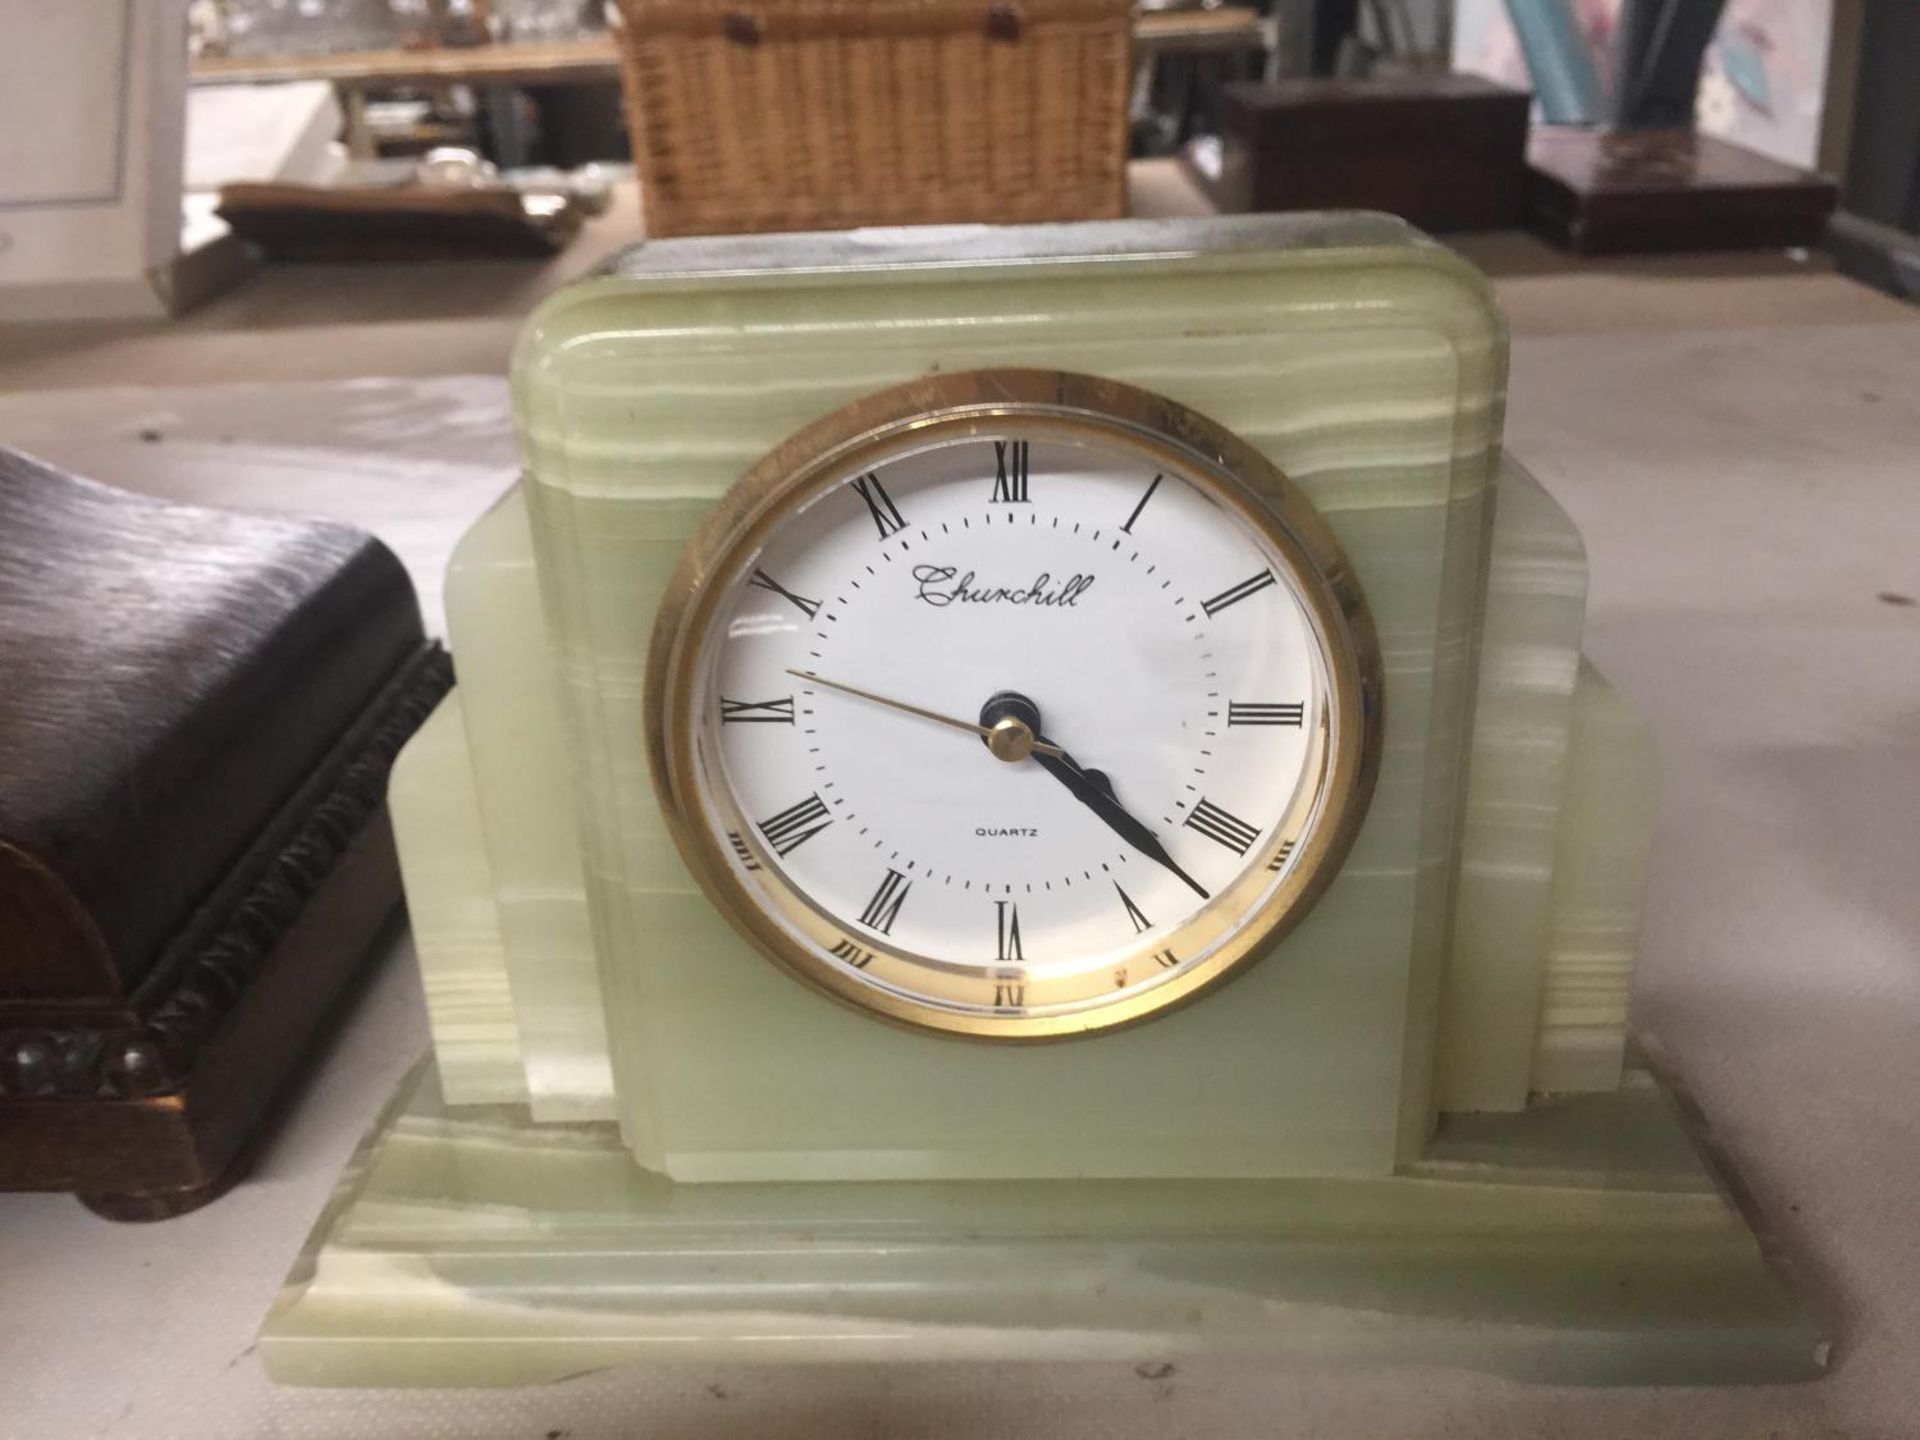 A VINTAGE CHURCHILL ONYX MARBLE MANTLE CLOCK TOGETHER WITH A LURPAK BUTTER DISH AND TOAST RACK - Image 3 of 3